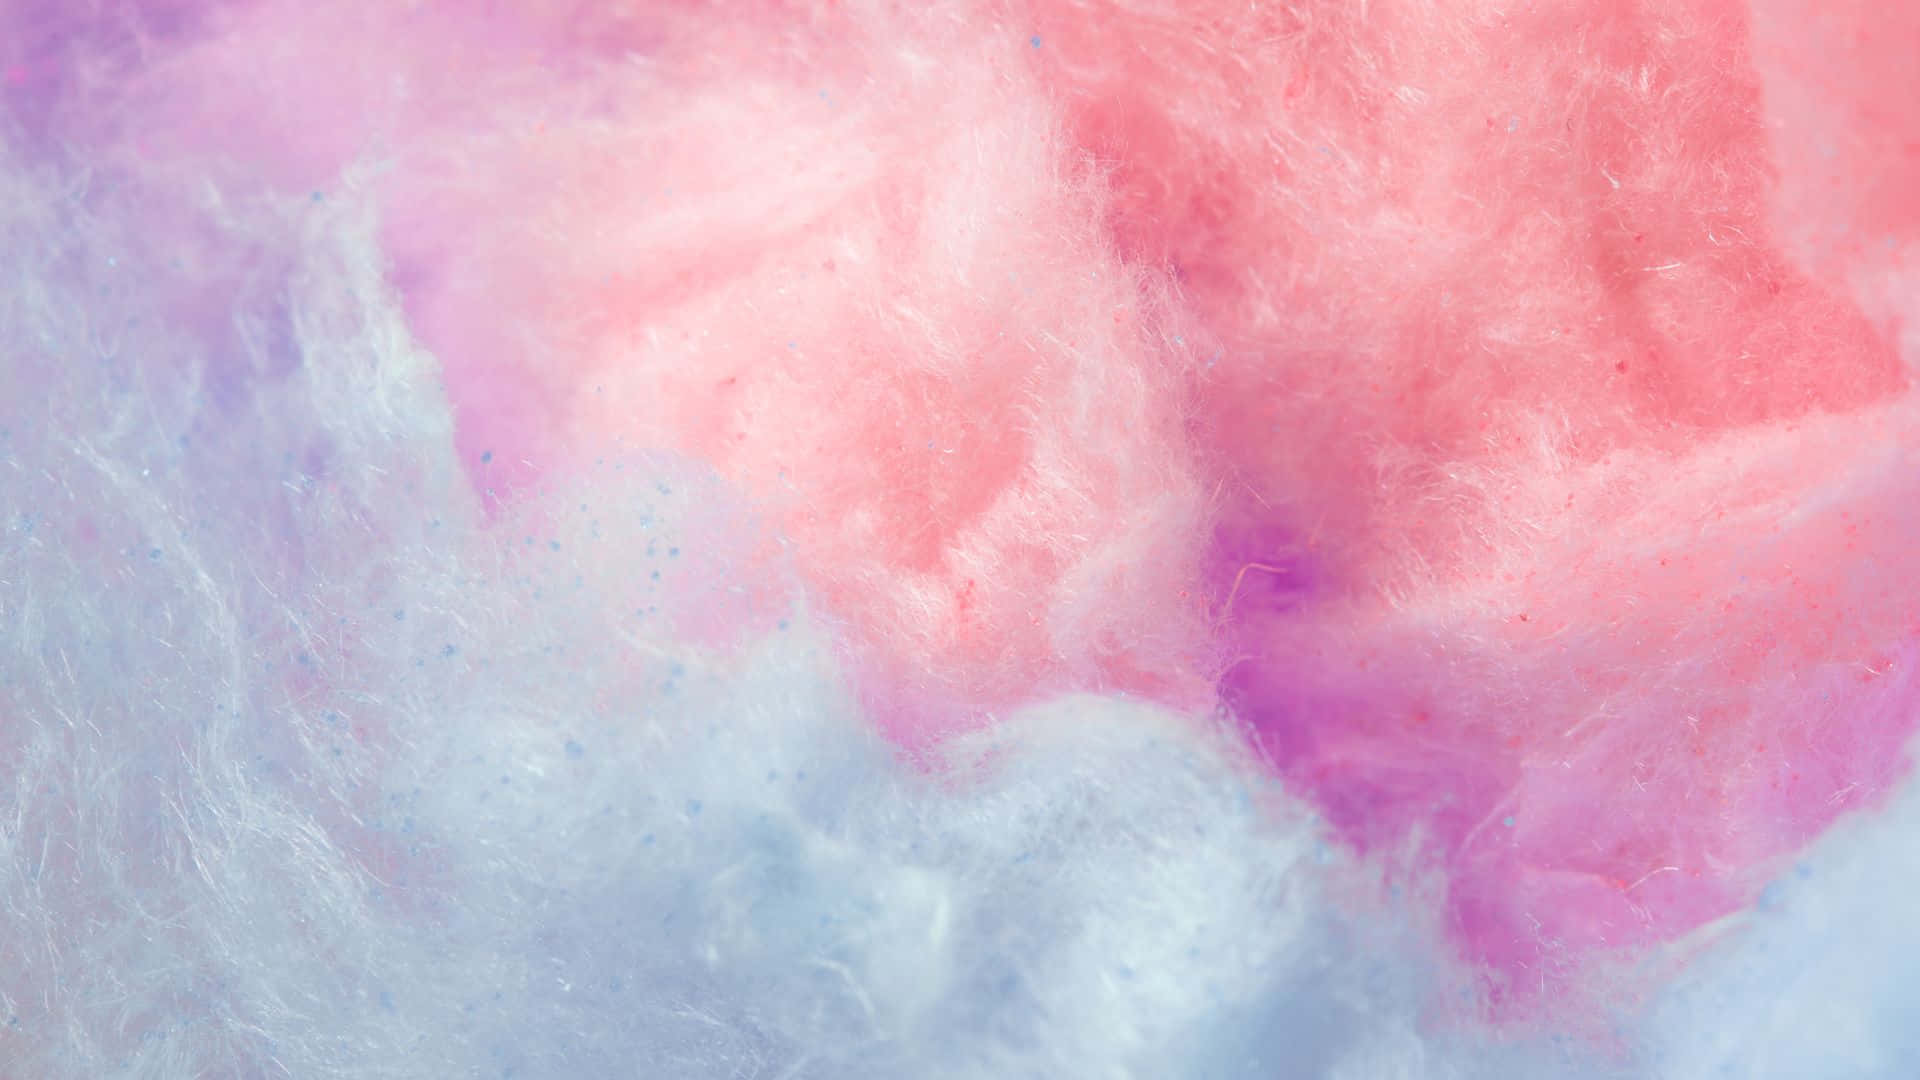 Fluffy Pink and Blue Cotton Candy Wallpaper